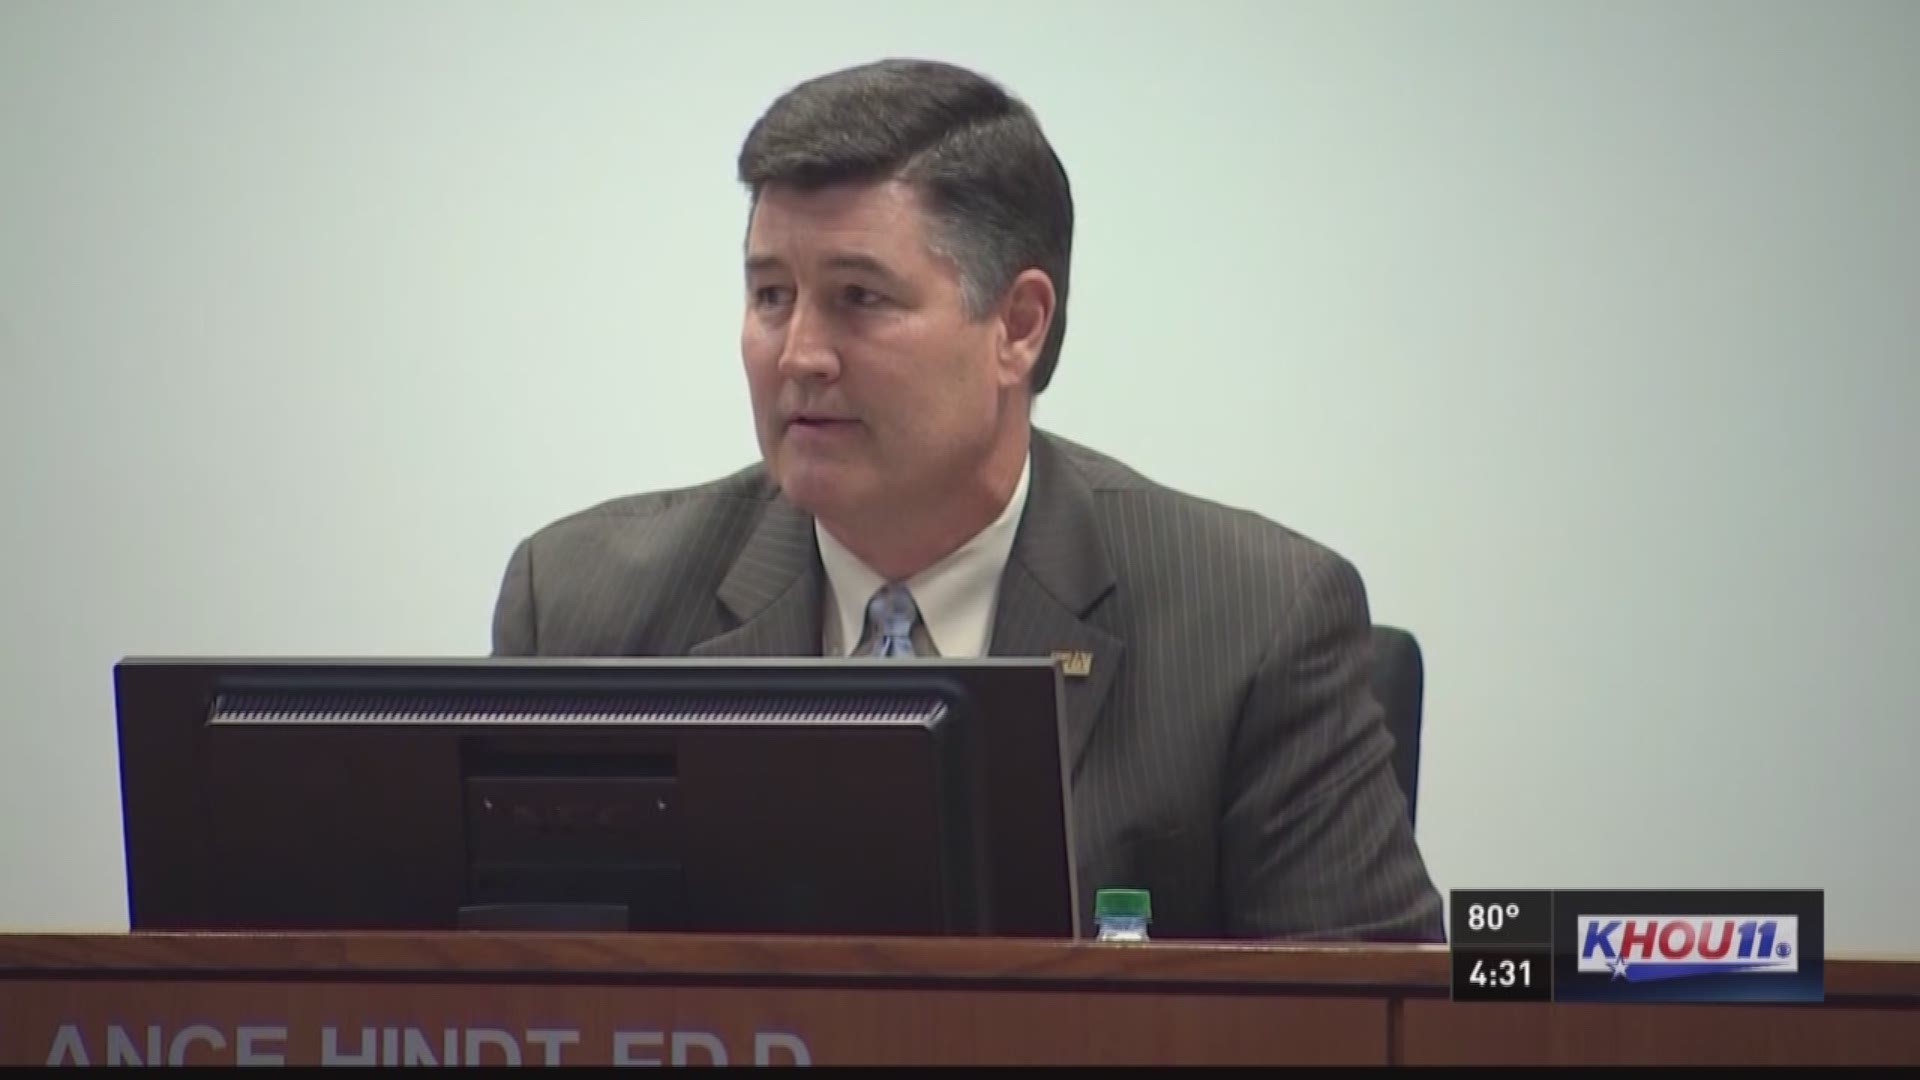 Katy Schools Superintendent Lance Hindt is expressing interest in speaking with his accuser one-on-one.